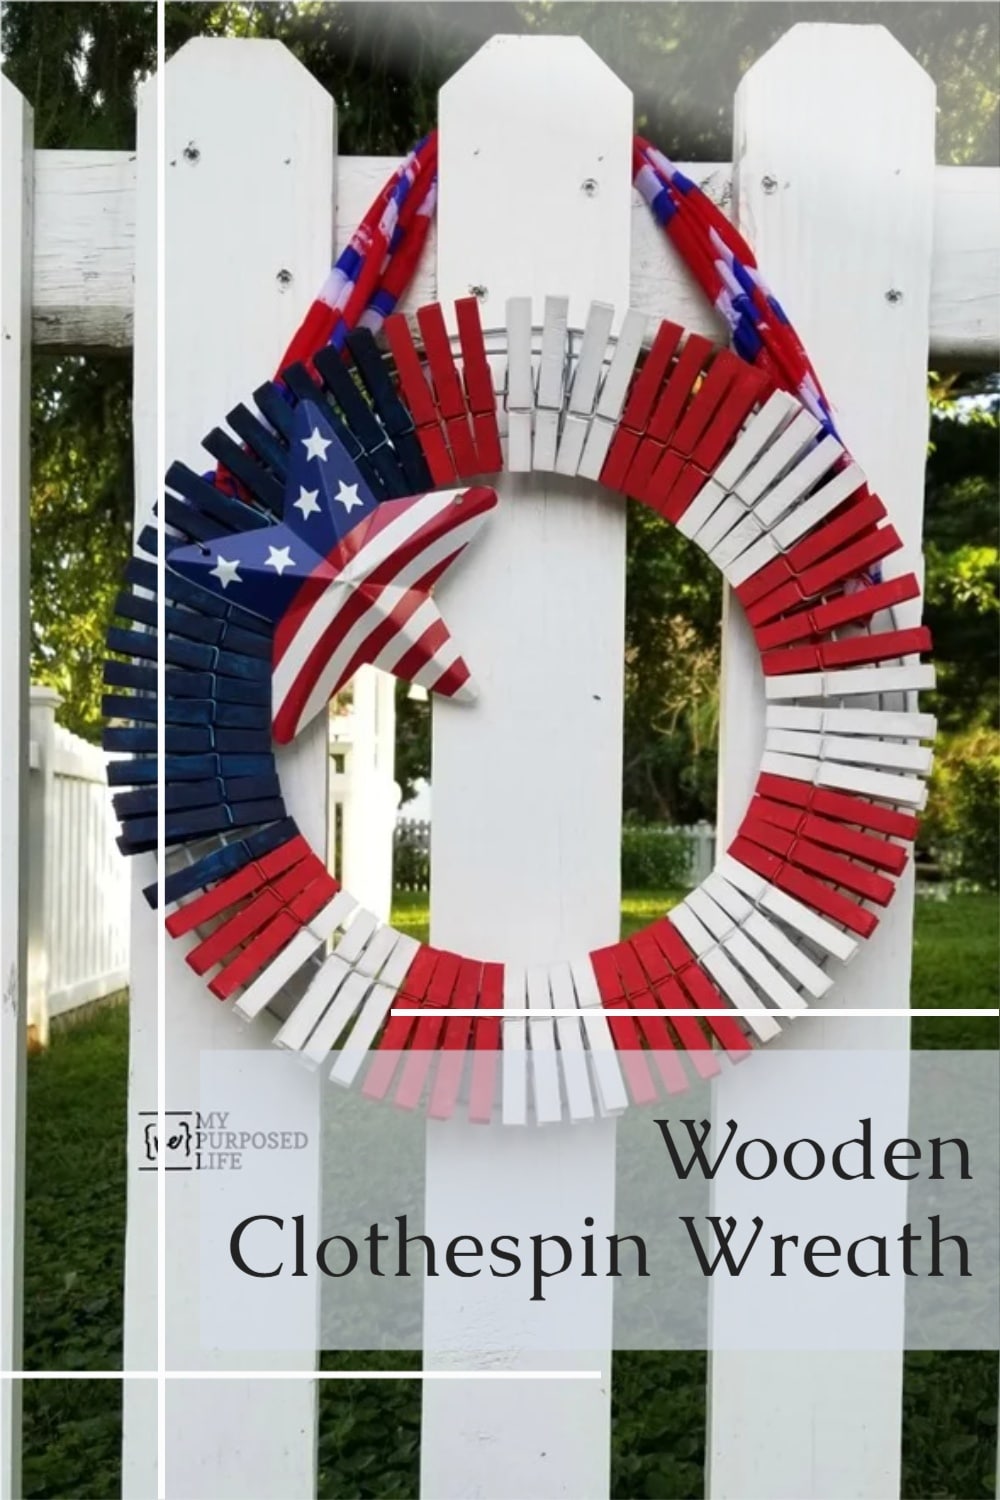 How to make a patriotic clothespin wreath using items from the dollar store. Easy way to paint wooden clothespins to make your own wreath, step by step. #MyRepurposedLife #dollarstorecrafts #4thofJuly #patrioticdecor via @repurposedlife